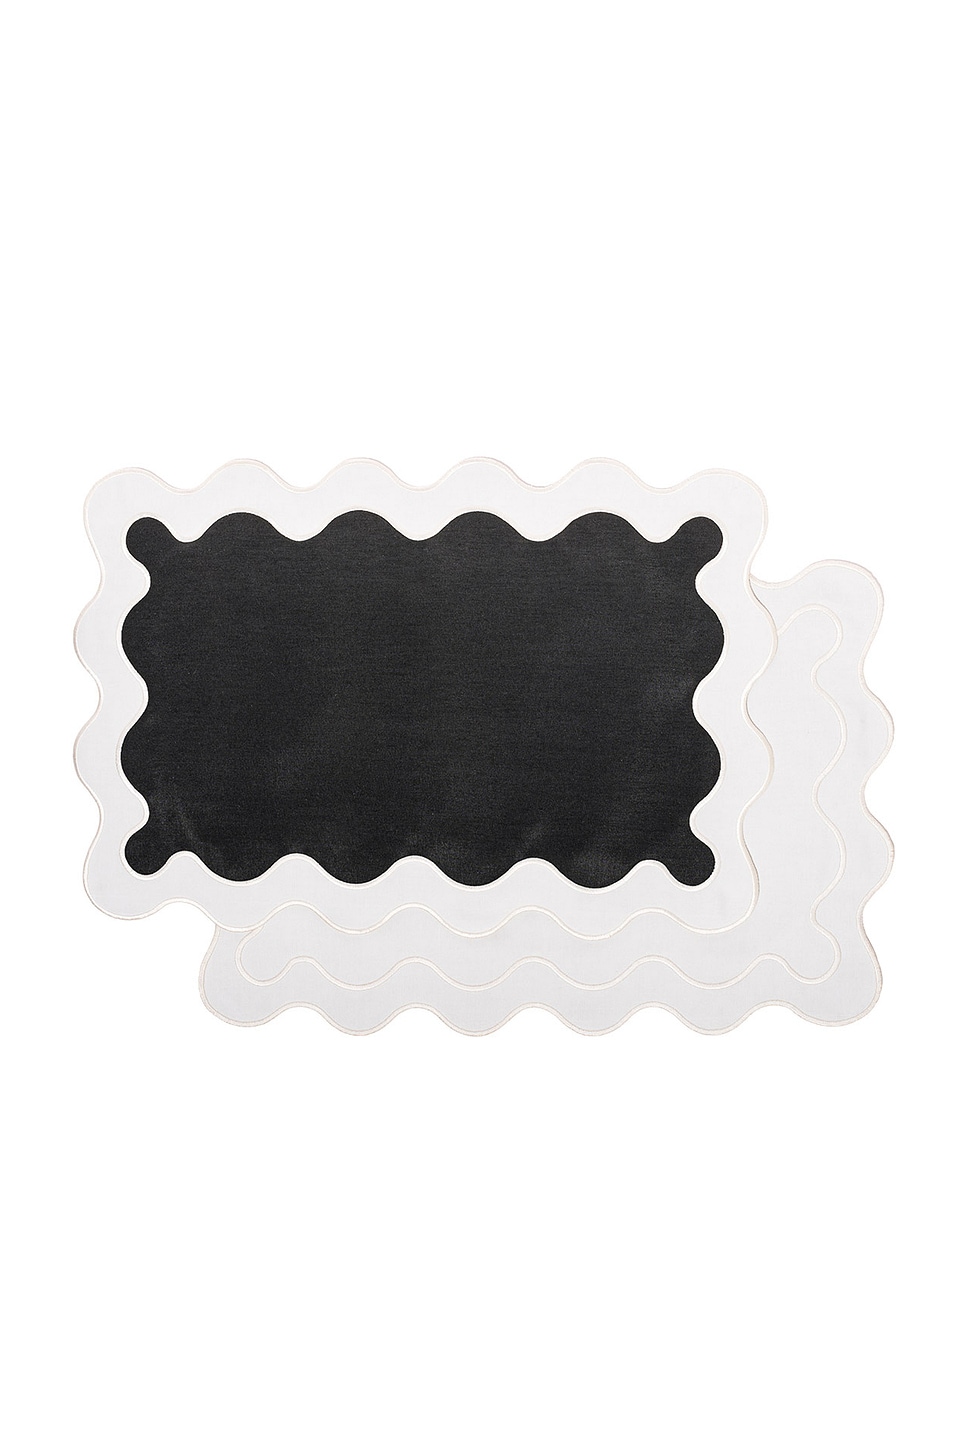 Image 1 of business & pleasure co. Placemat - Set Of 4 in Riviera Black